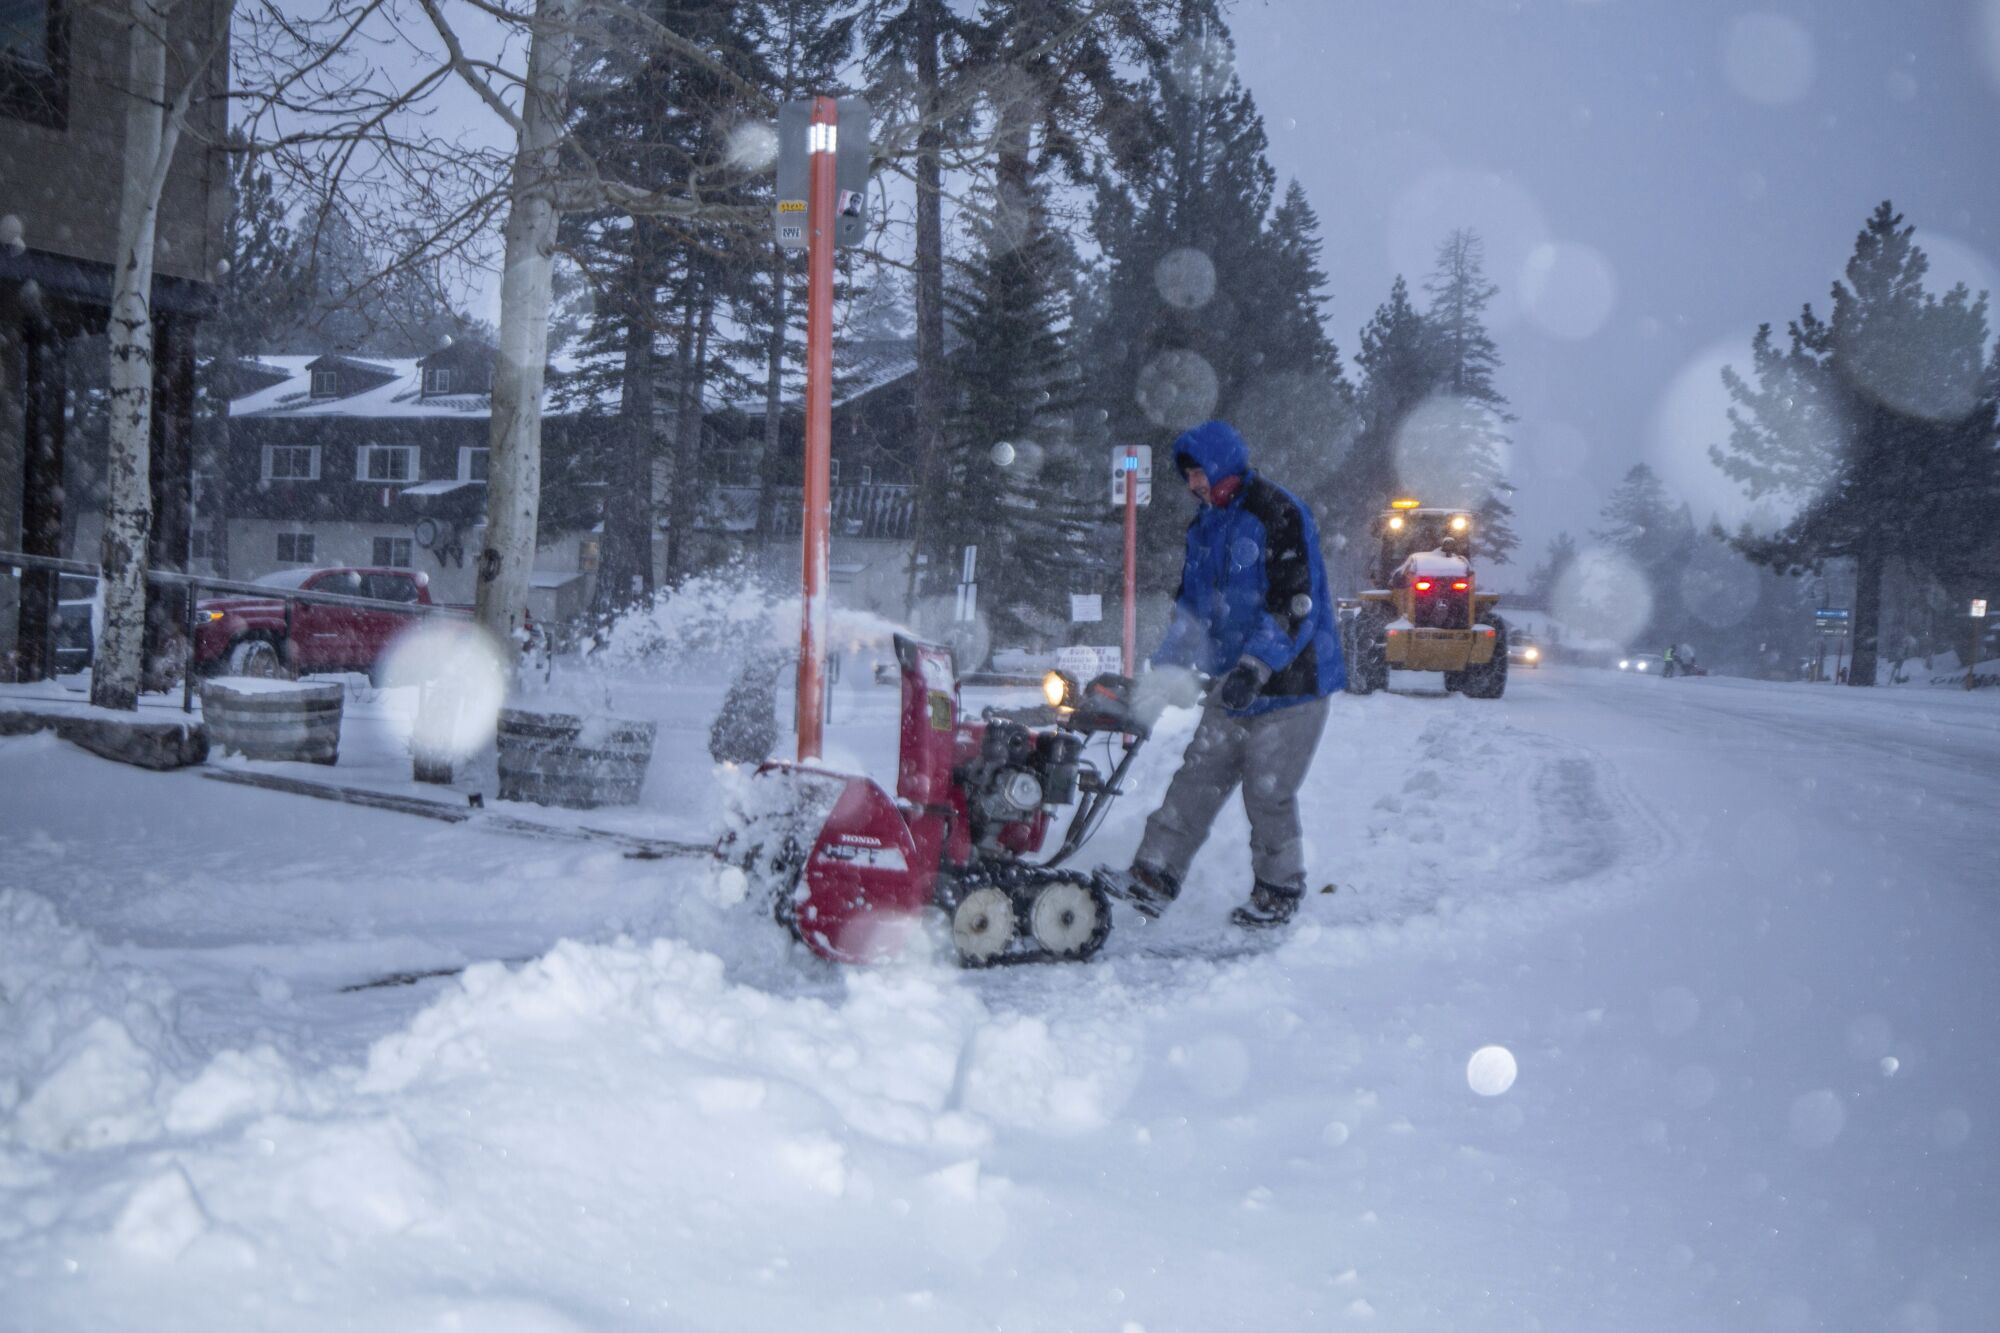 A man uses a snow blower to clear a street in Mammoth Lakes